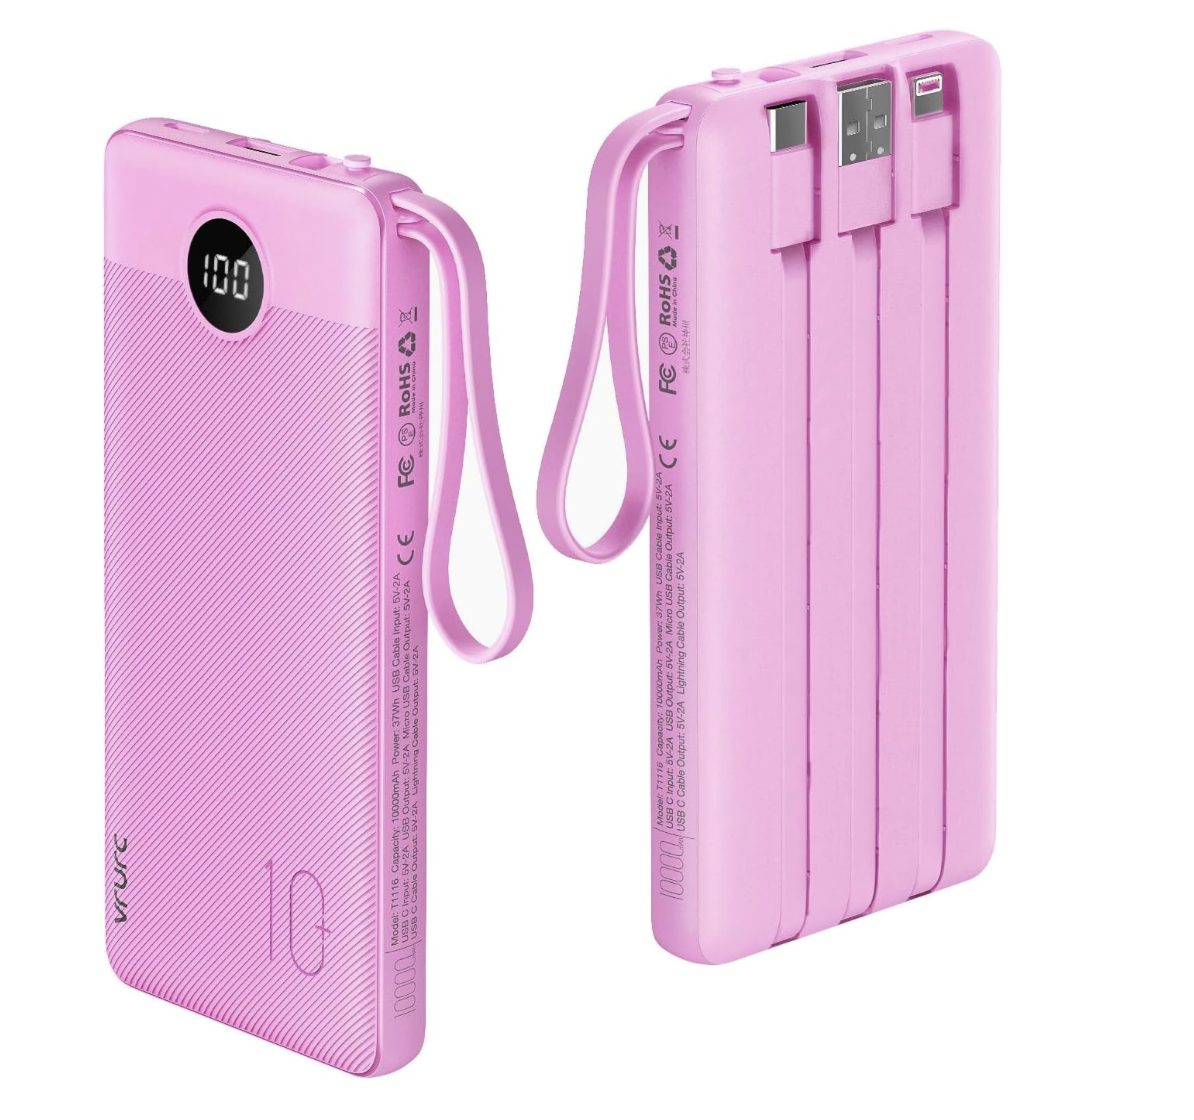 Portable Phone Charger, $19